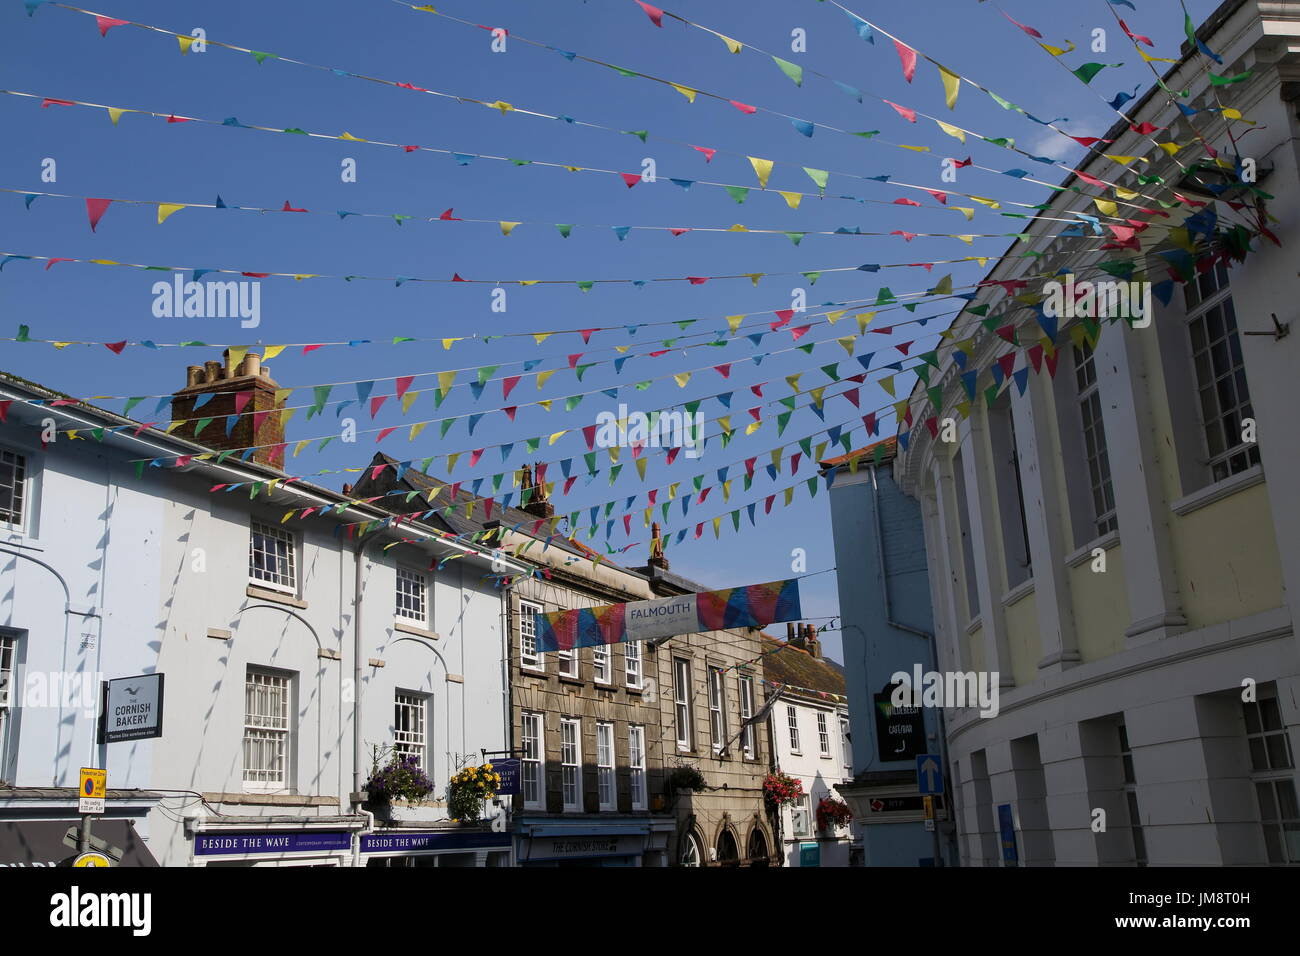 Bunting flags flying in street of town centre, Falmouth, Cornwall, England, UK Stock Photo